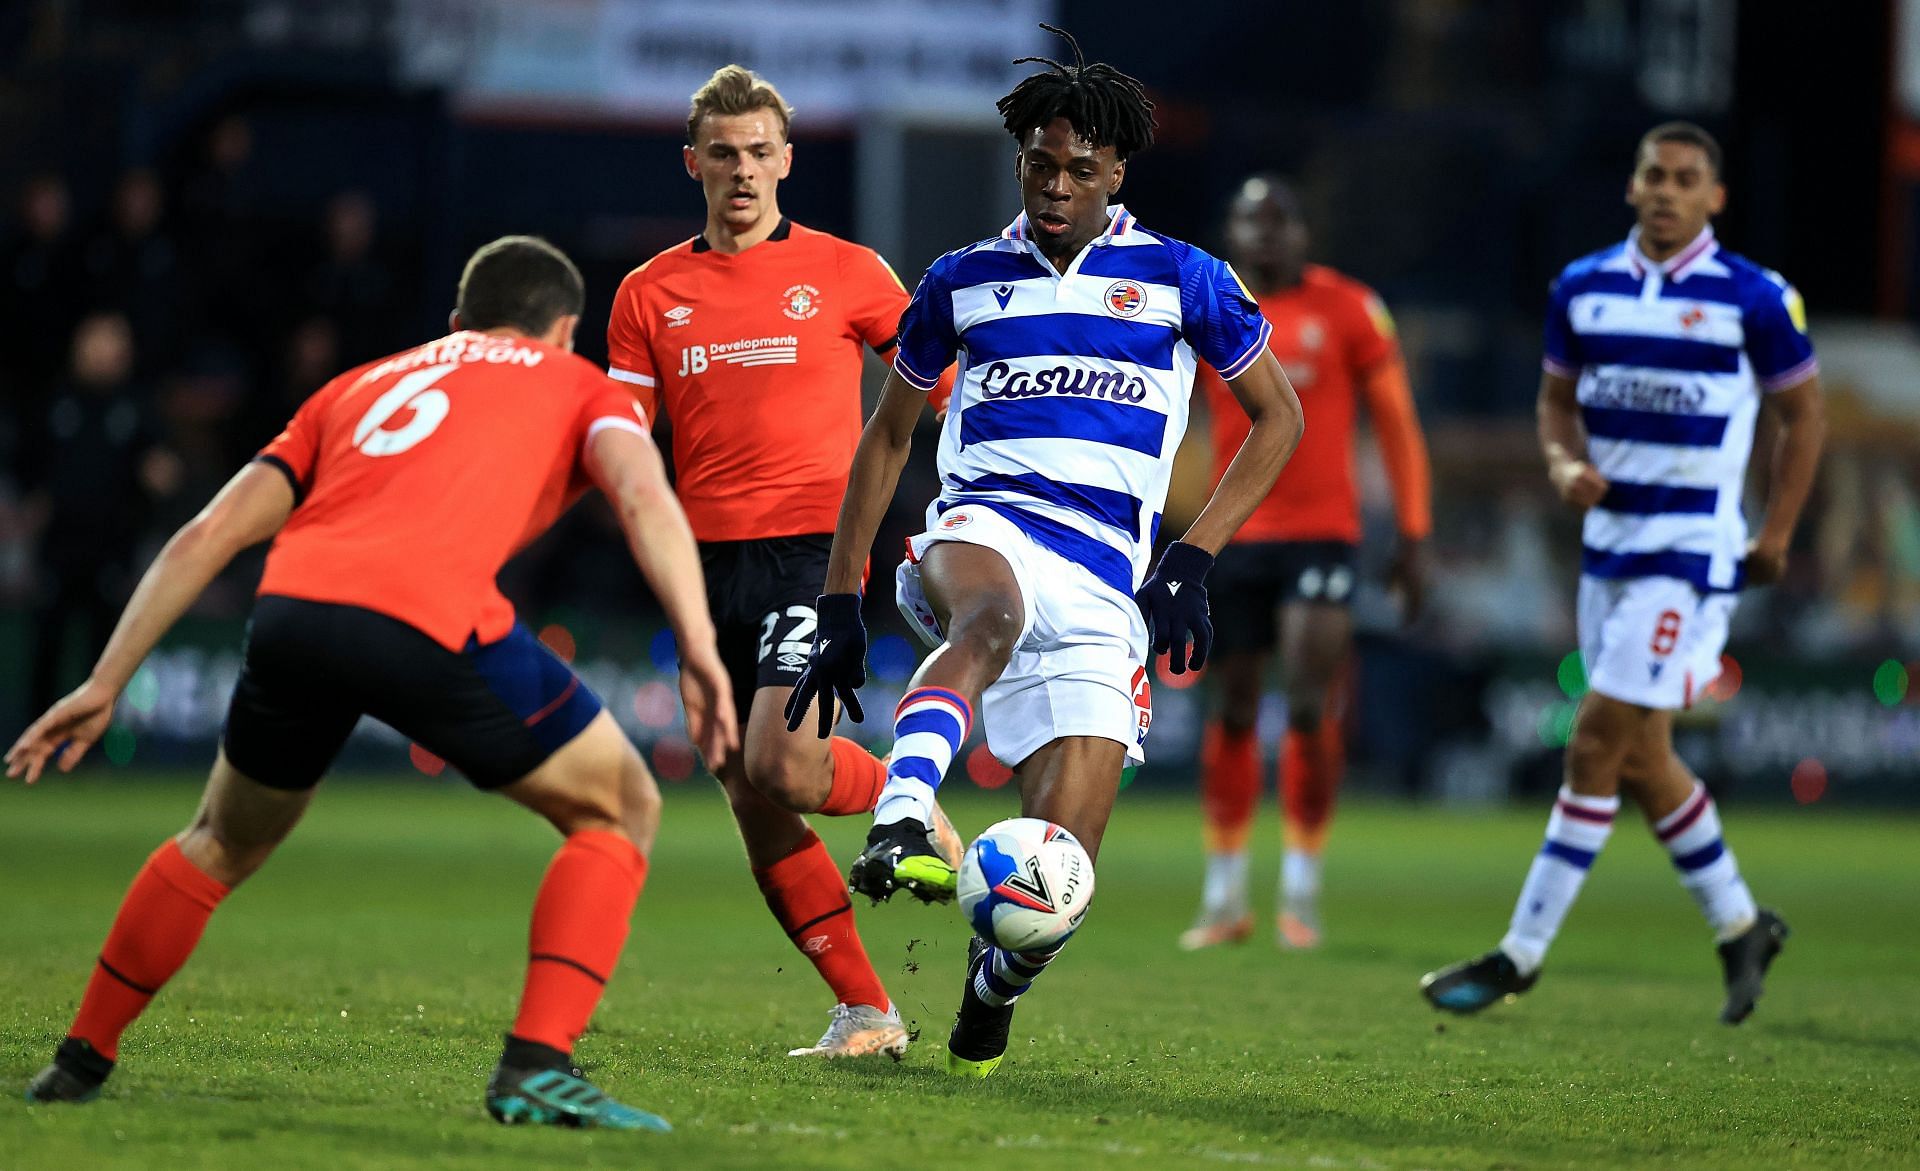 Reading play host to Luton Town on Wednesday